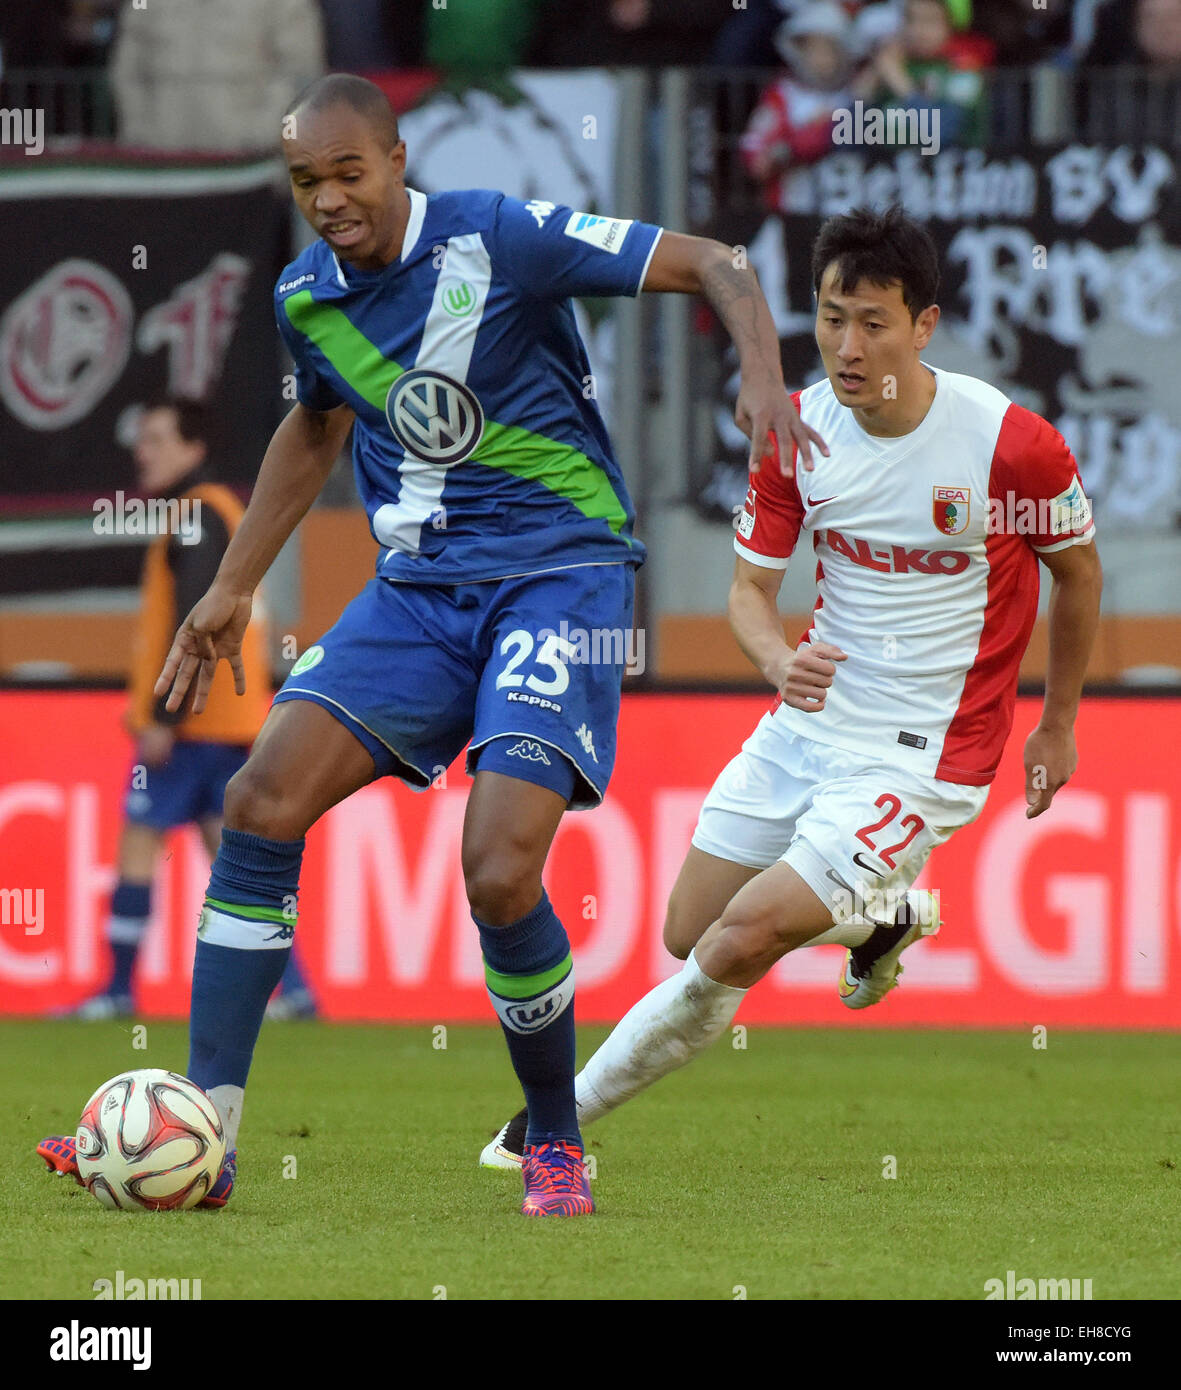 Augsburg, Germany. 07th Mar, 2015. Augsburg's Ji Dong Won (R) and Wolfsburg's Naldo (L) fight for the ball during the German Bundesliga soccer match between FC Augsburg and VfL Wolfsburg at SGL-Arena in Augsburg, Germany, 07 March 2015. Photo: Stefan Puchner/dpa/Alamy Live News Stock Photo